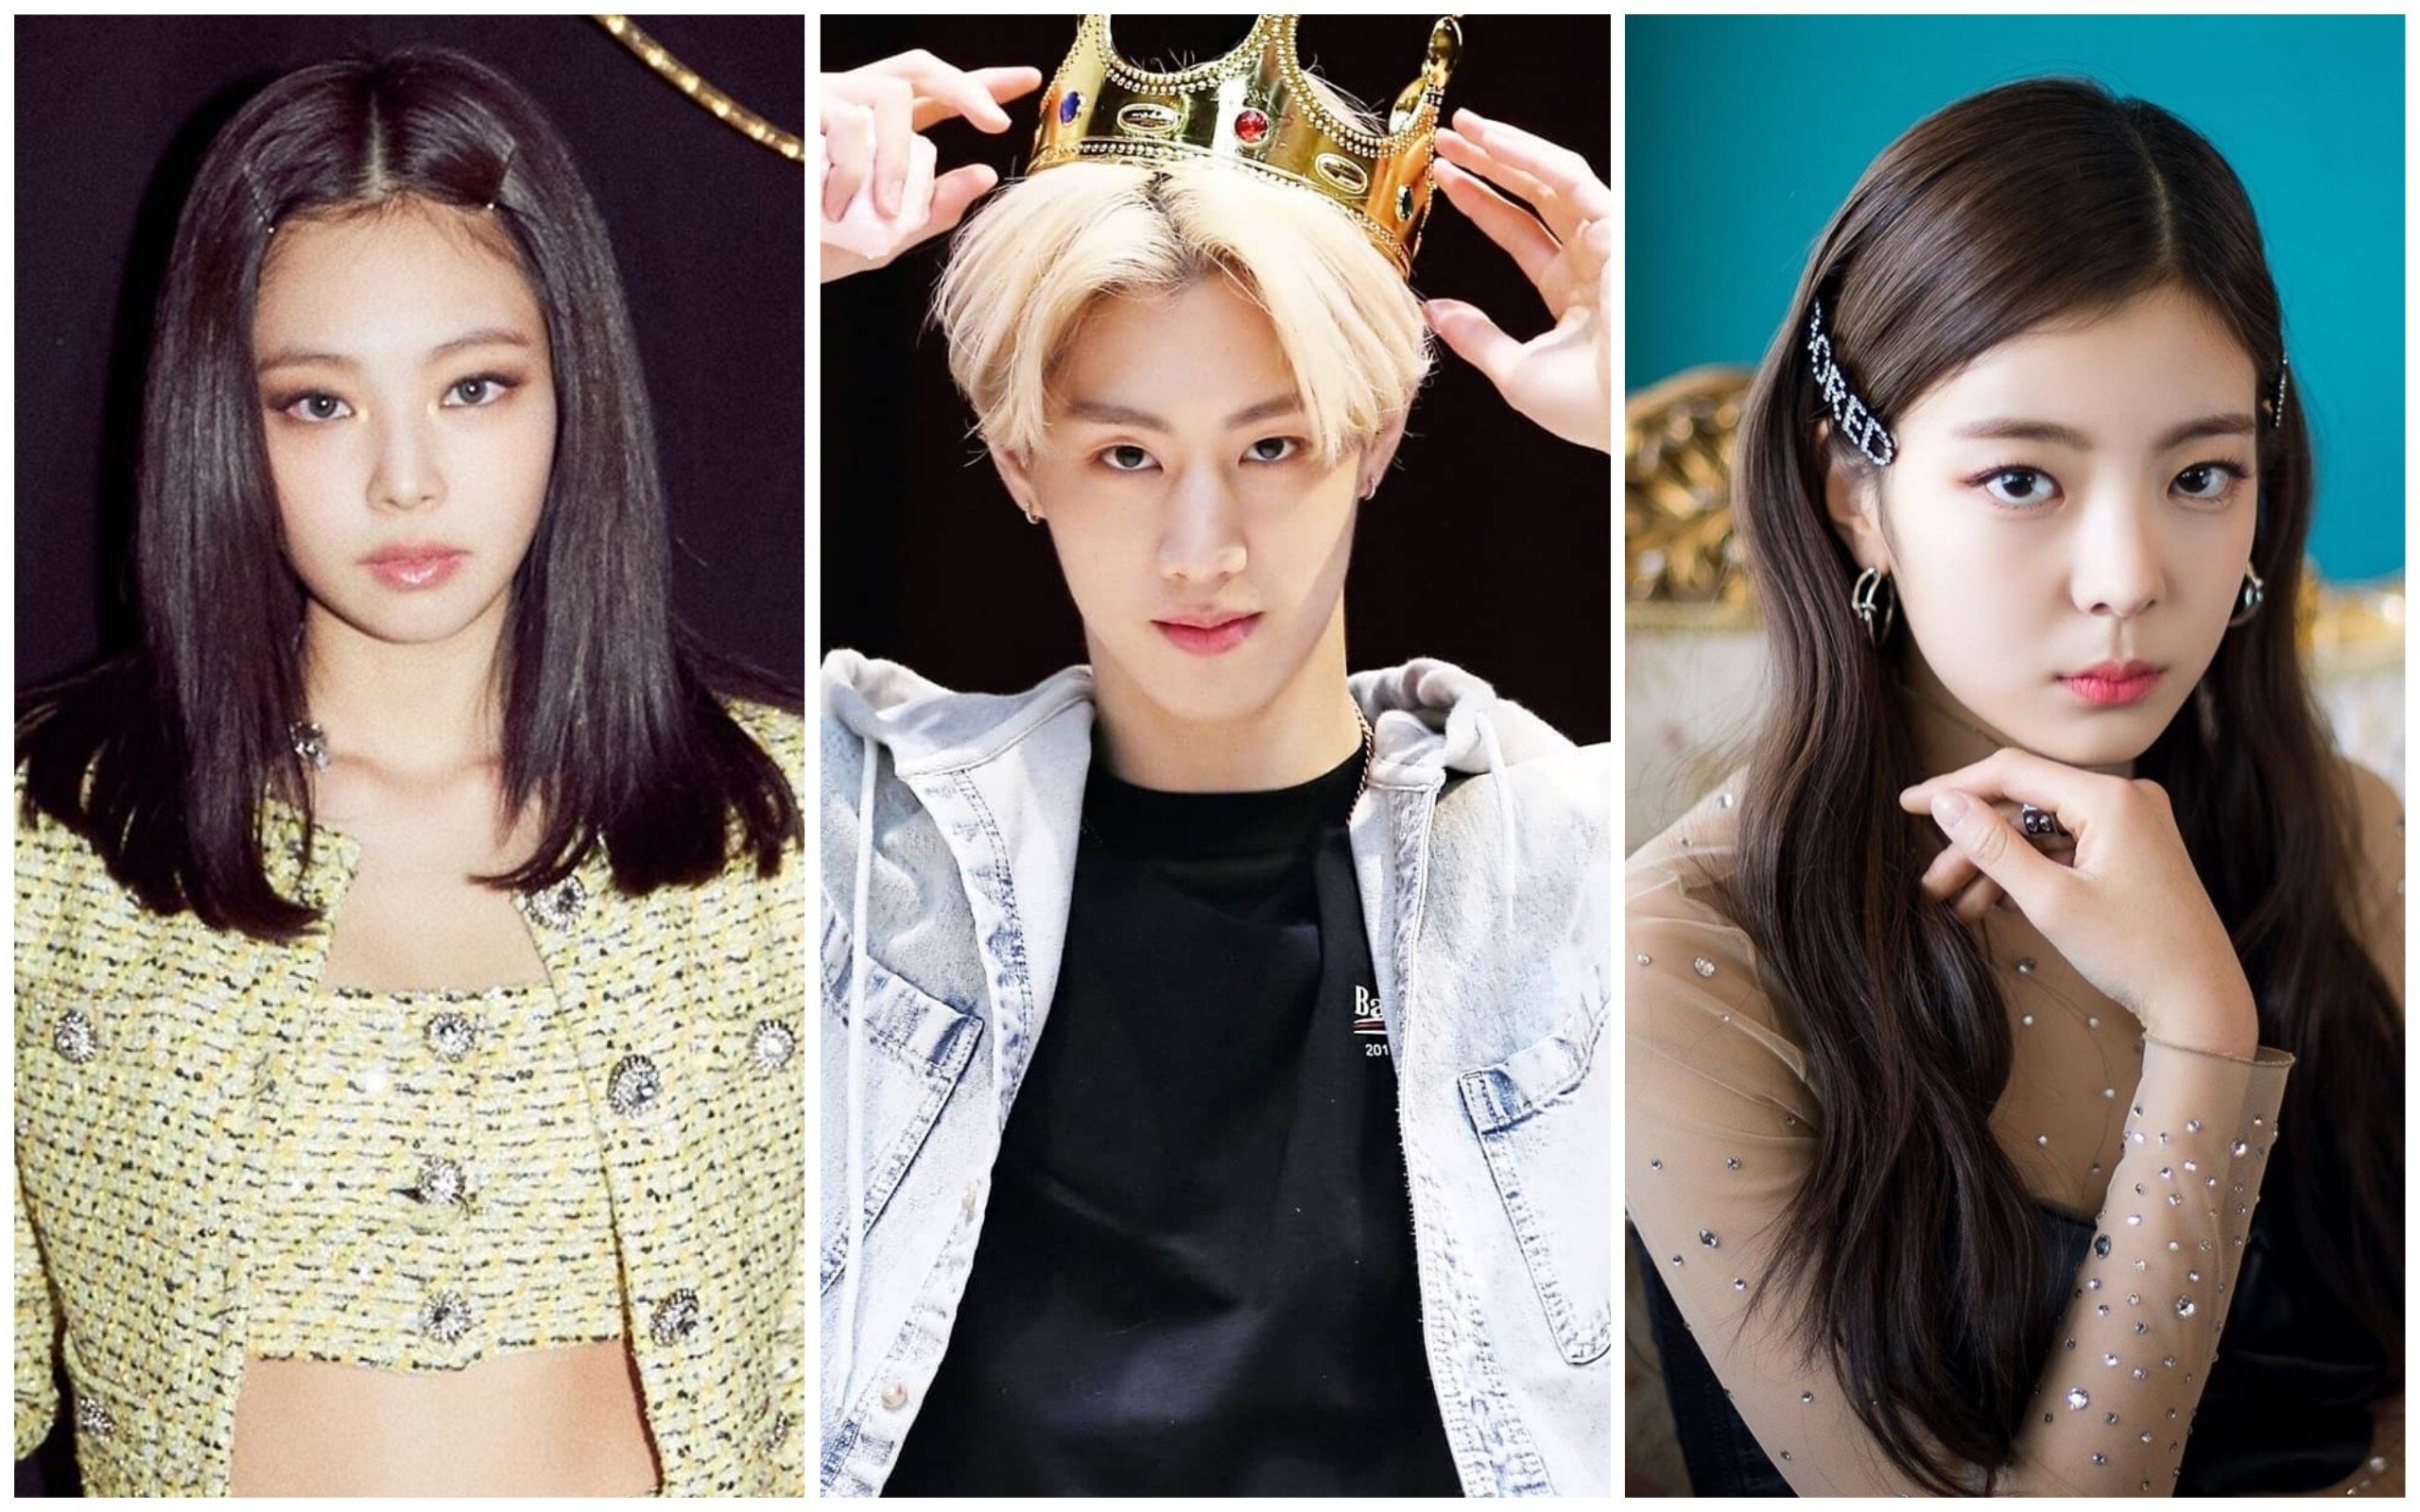 DId Jennie from Blackpink, Mark from Got7 or Itzy’s Lia ever need to find fame for money? Photo: Instagram